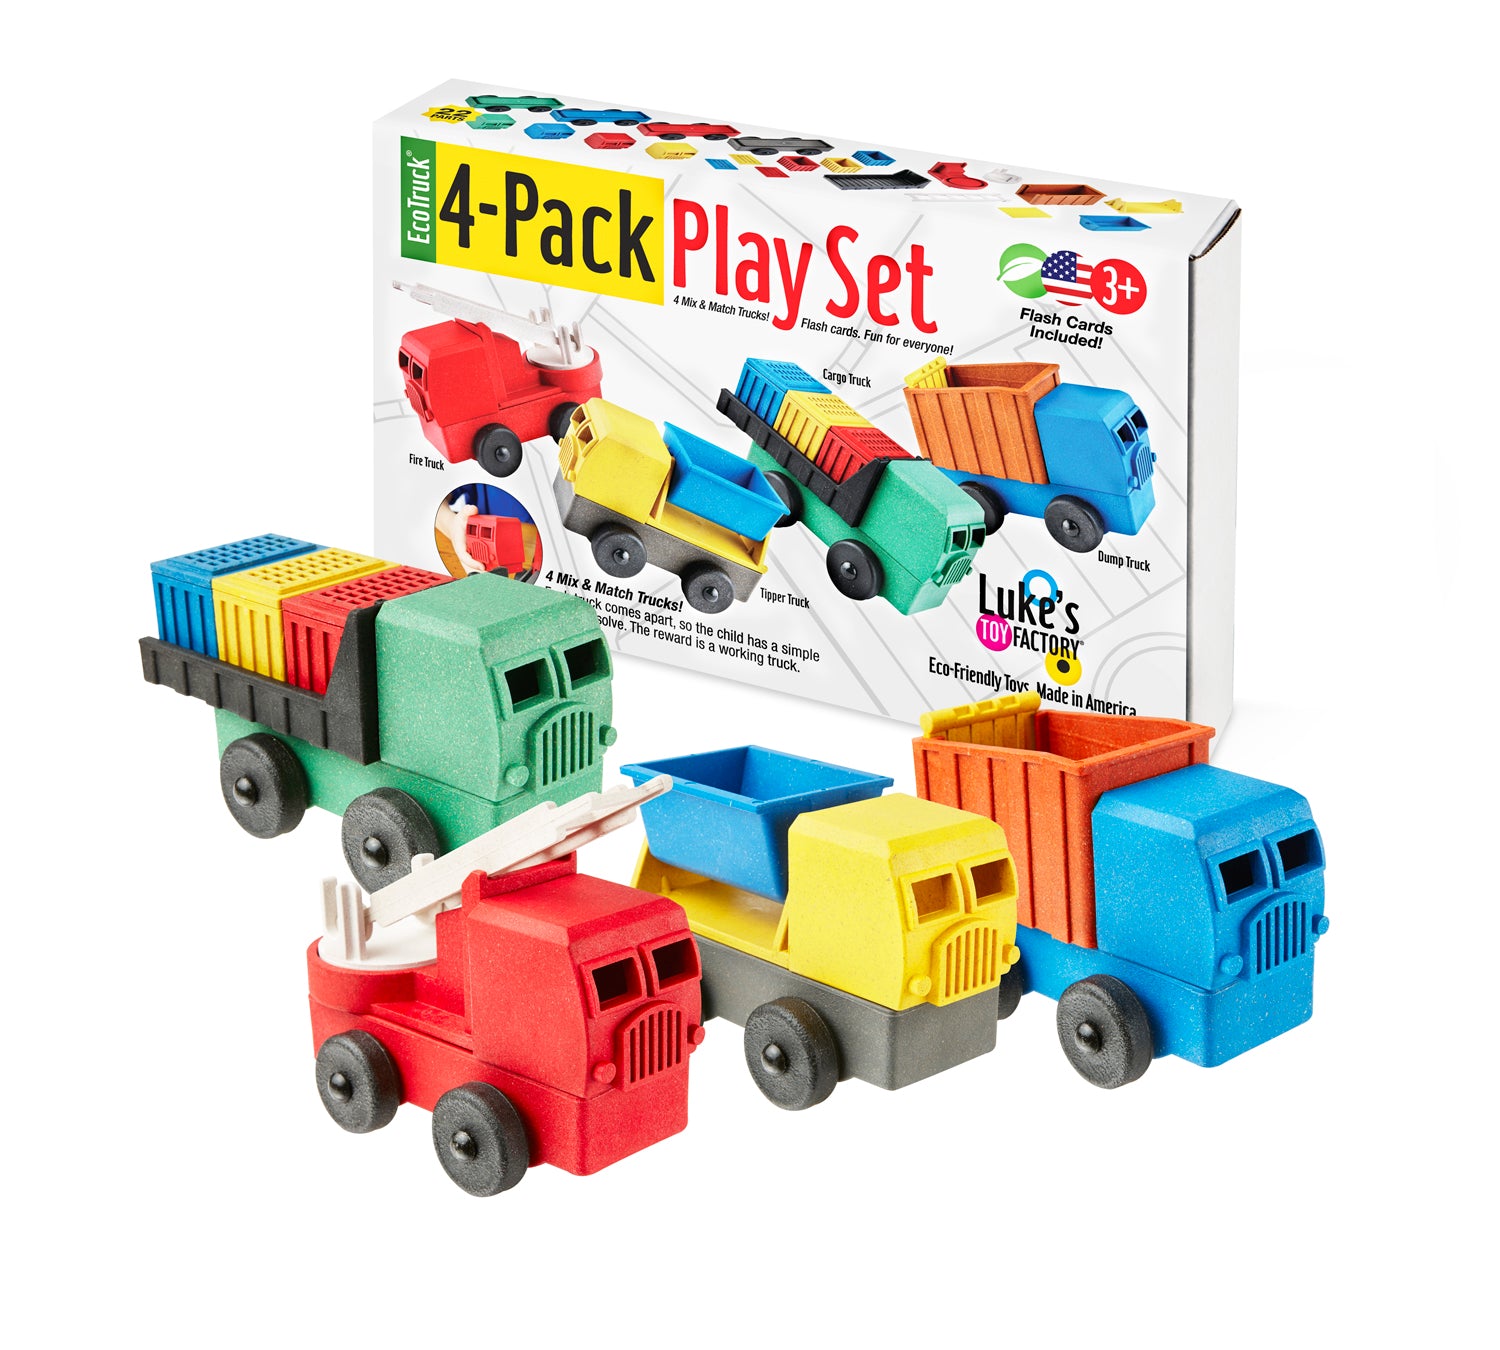 Educational Four-Pack of Toy Trucks – Luke's Toy Factory